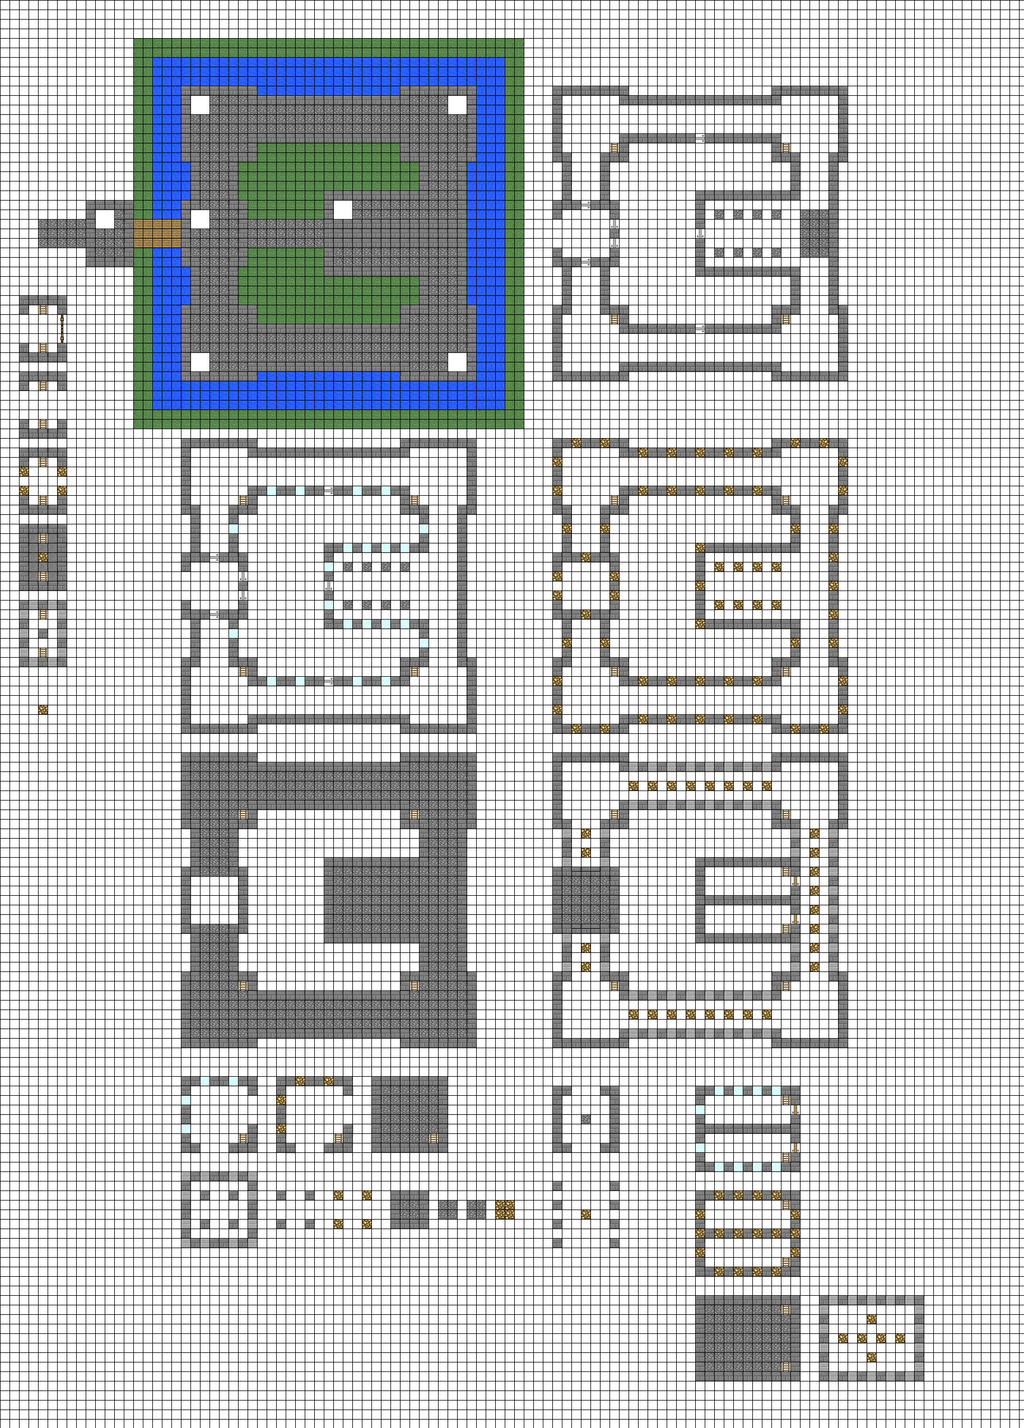 Fortress Layout Wip By Coltcoyote On Deviantart